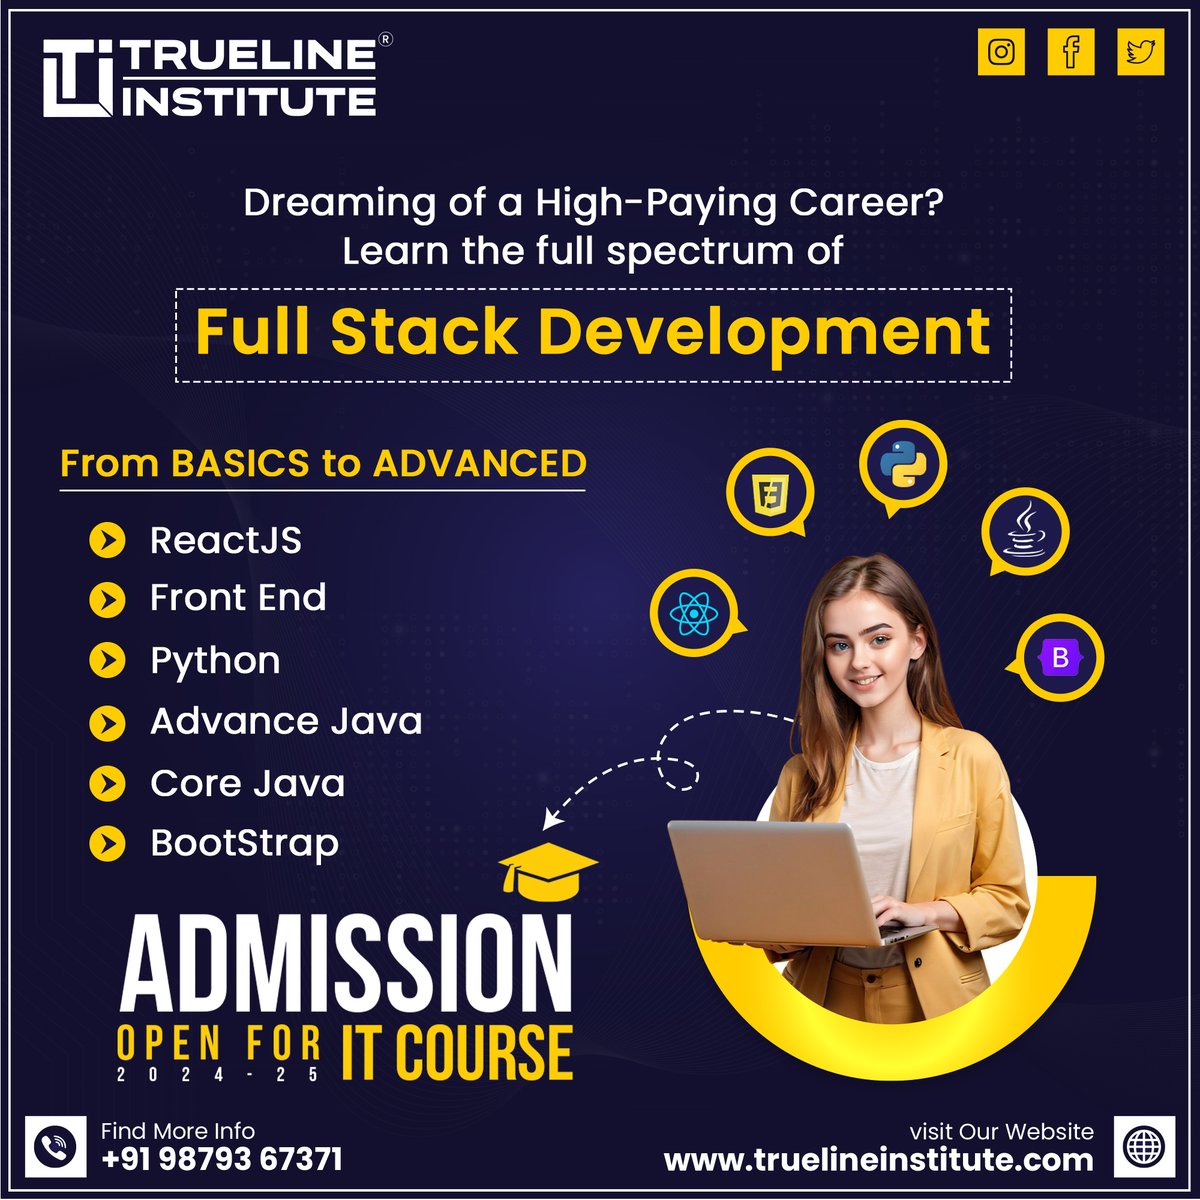 📢 Dreaming of a High-Paying Career?  | Trueline Institute
☎️ +91 98793 67371
🌐truelineinstitute.com
📧truelineinstitute@gmail.com
#truelineinstitute #institute #itcourses #fullstackdevelopment #codeeverything #webdevelopment #stackoverflow #frontend #backend